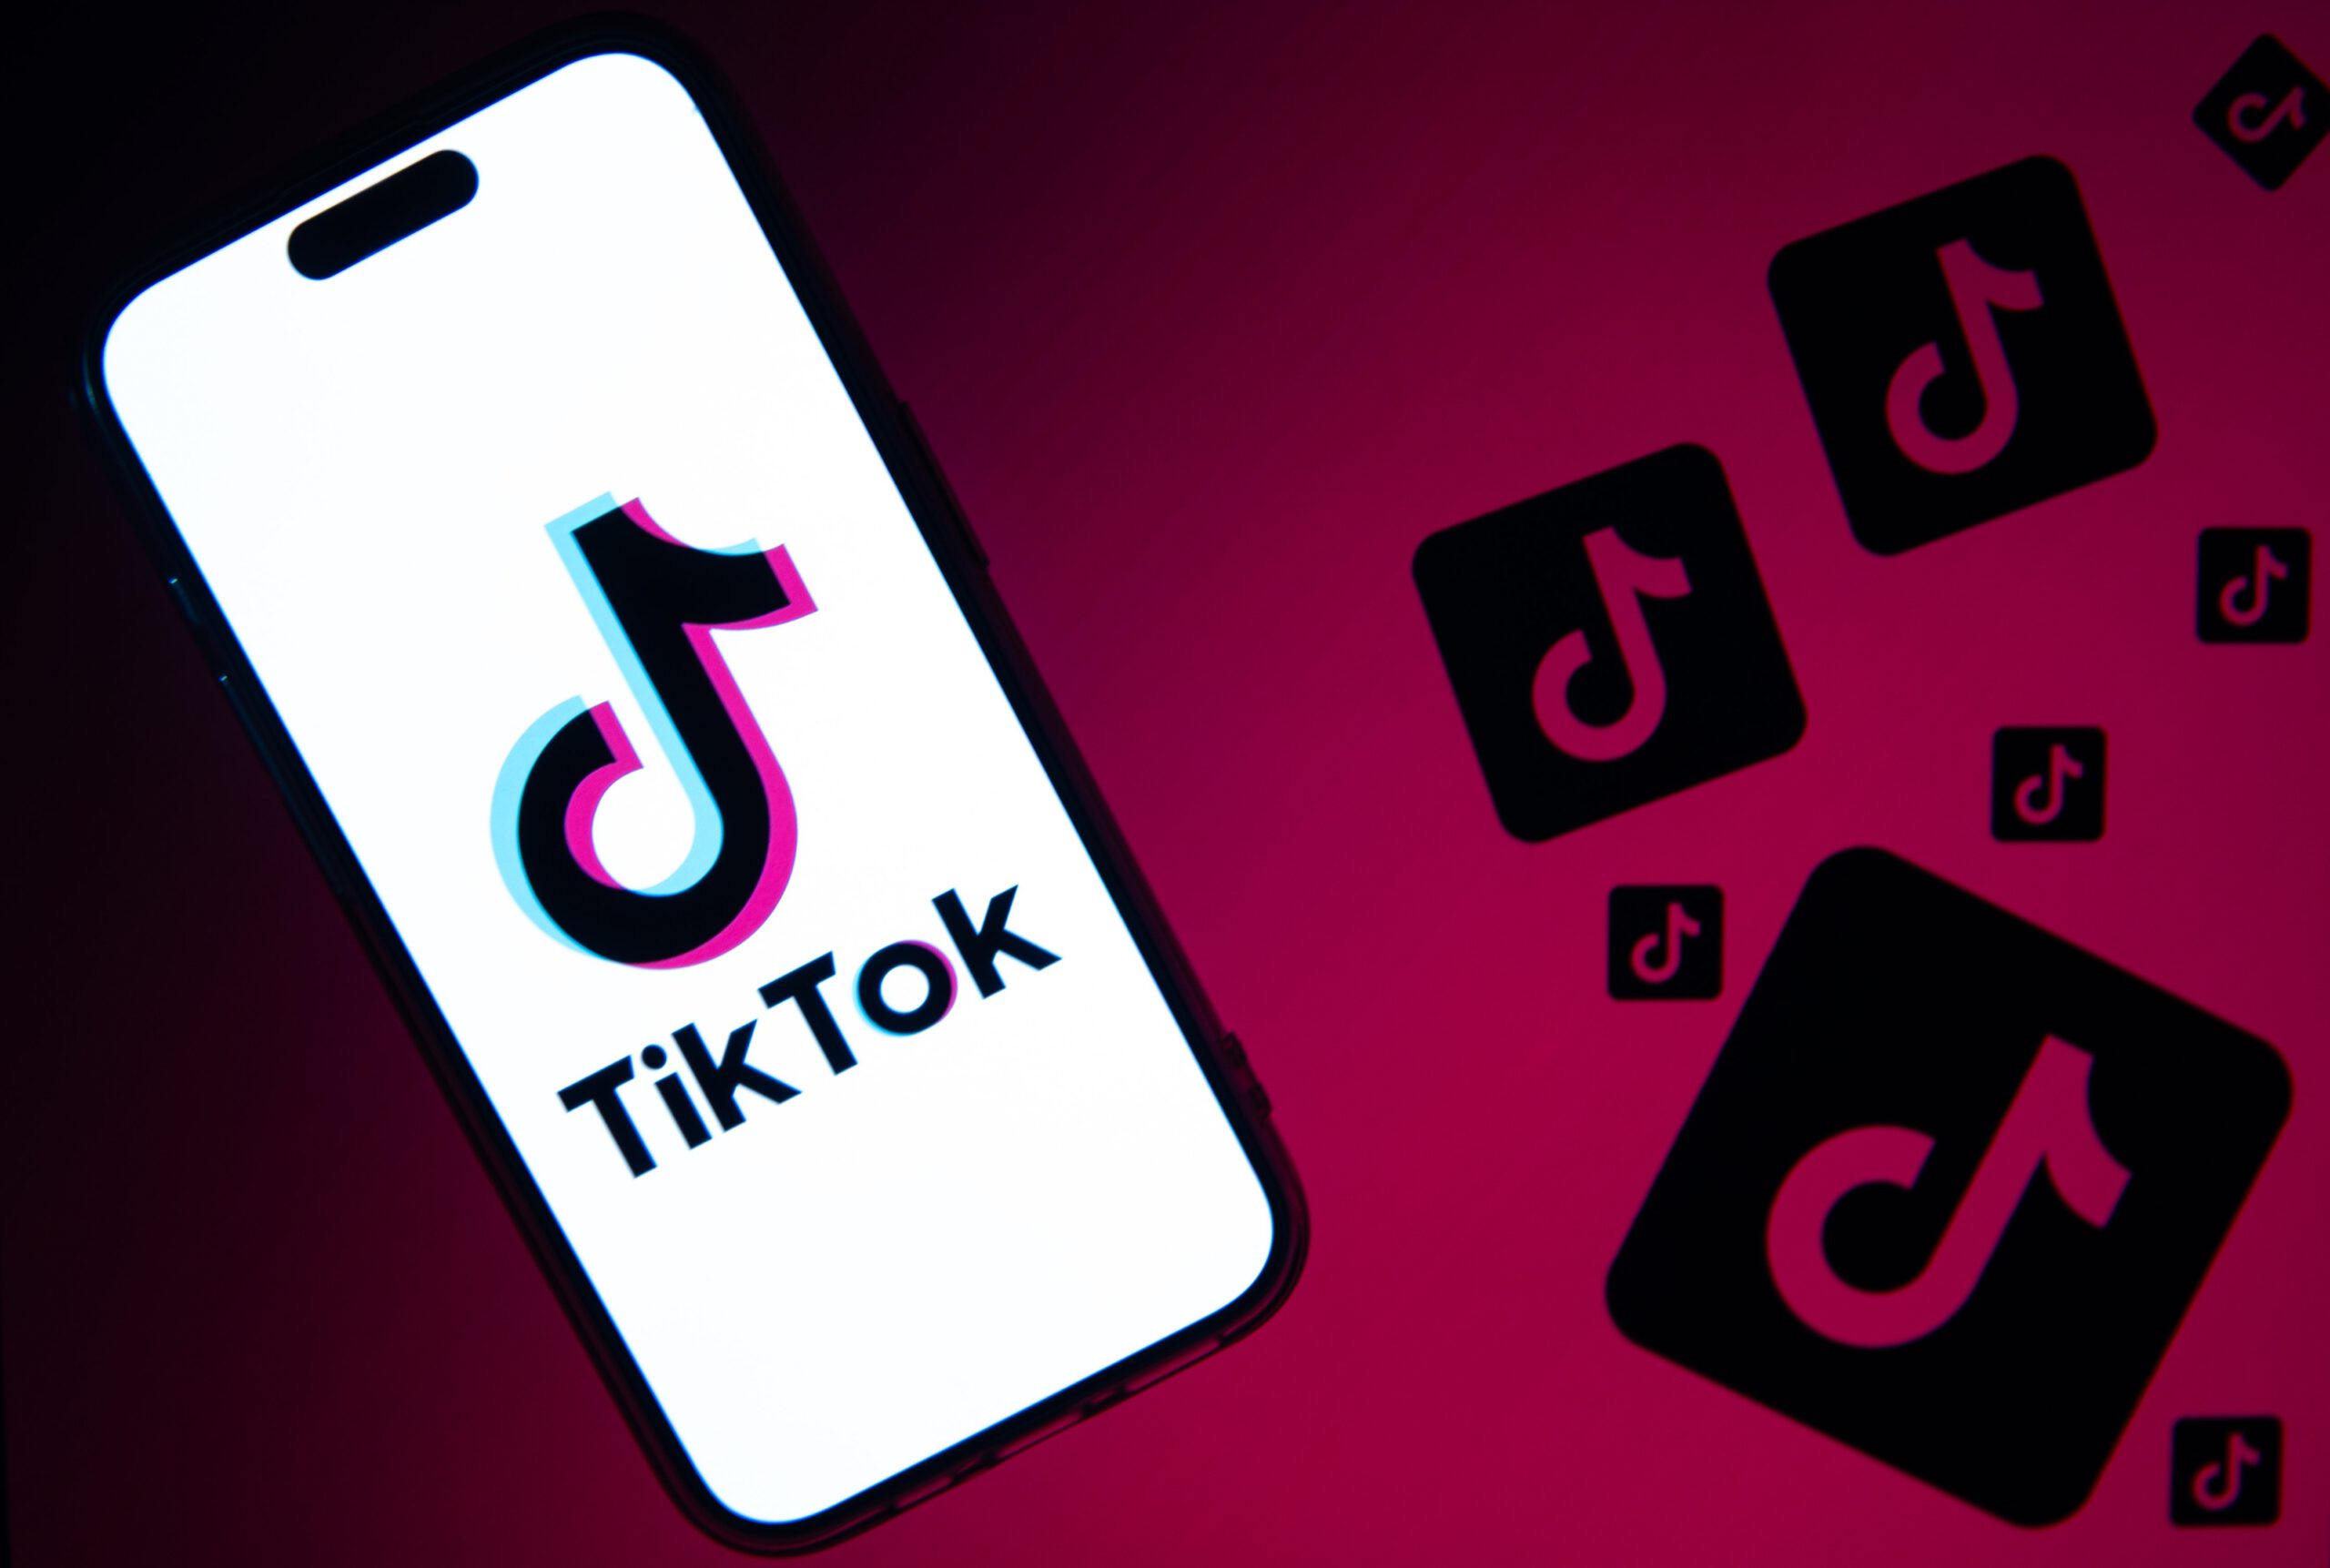 An phone screen with the TikTok logo surrounded by little TikTok logos on a pink background.